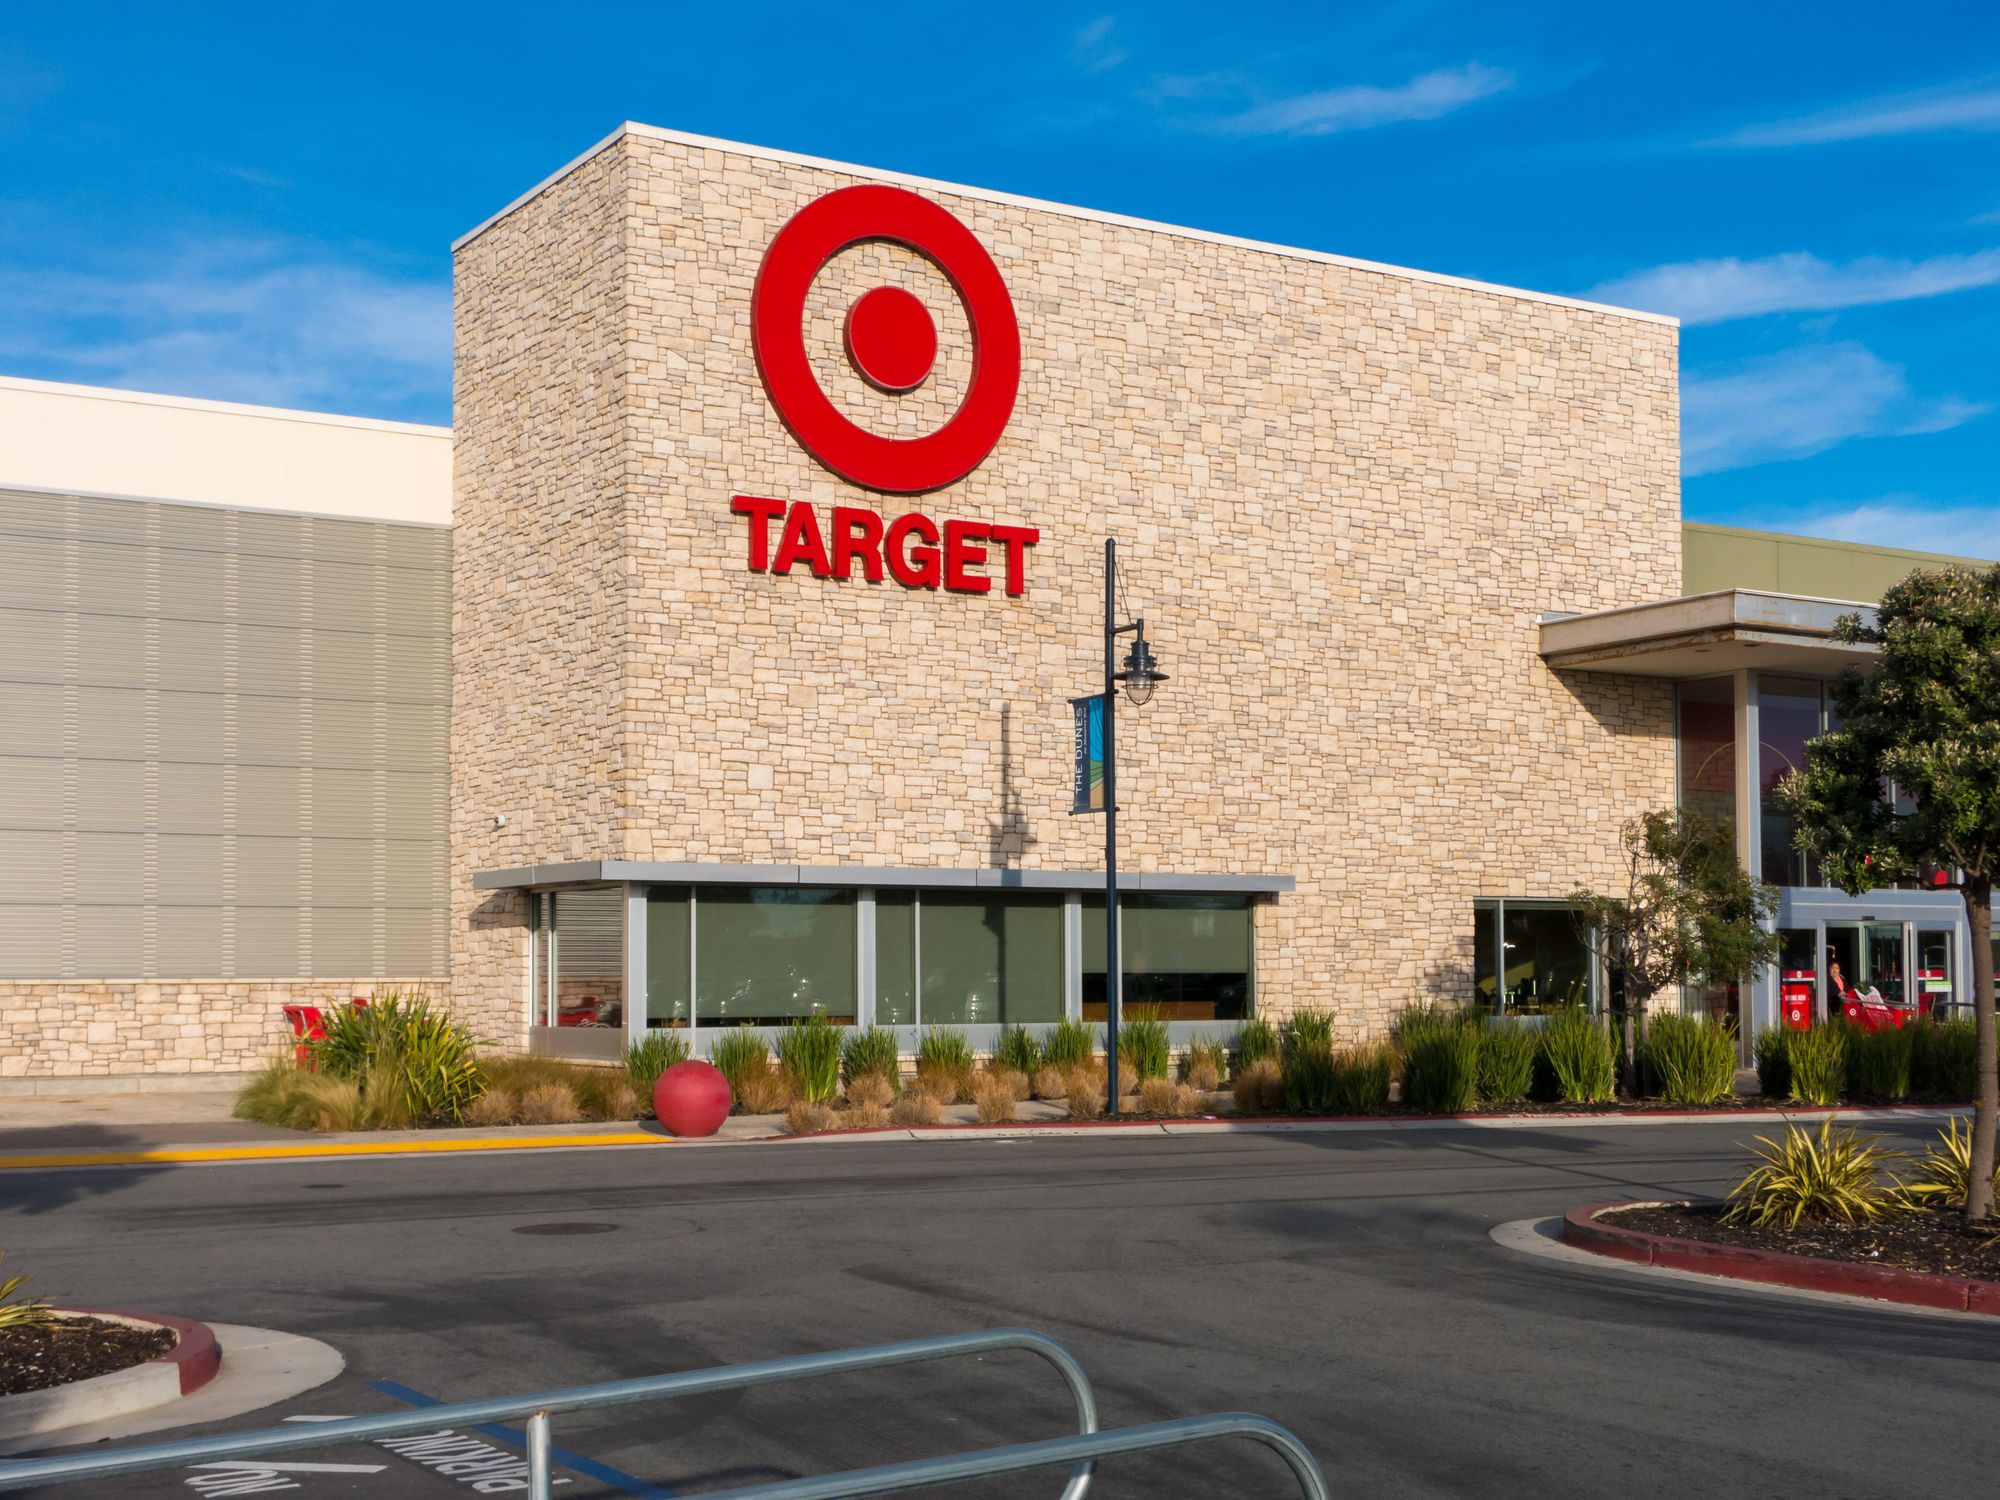 MARINA, CA/USA - DECEMBER 30, 2013: Exterior view of a Target retail store. Target Corporation is an American retailing company headquartered in Minneapolis, Minnesota. It is the second-largest discount retailer in the United States.